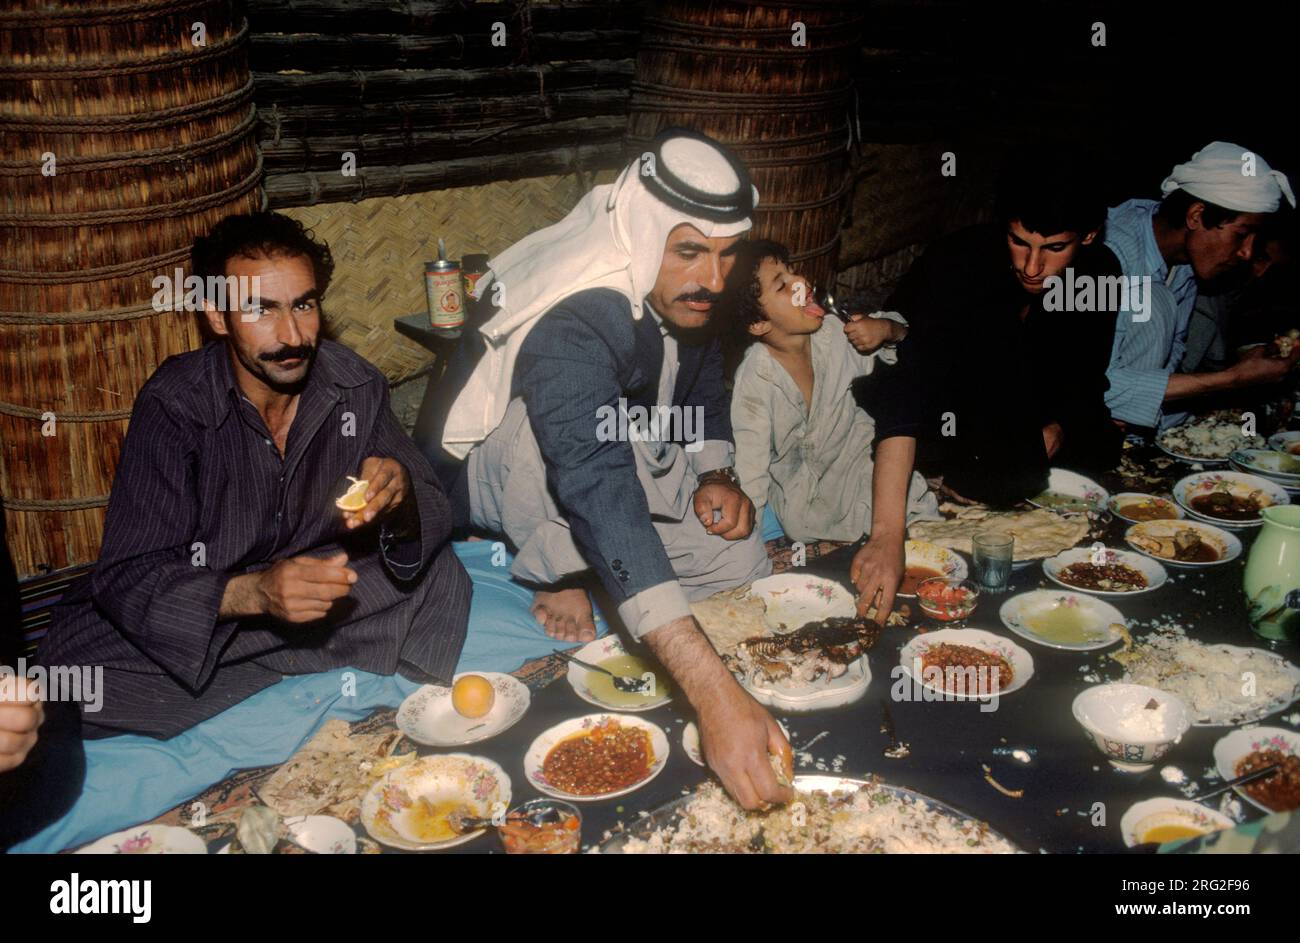 Marsh Arabs Southern Iraq 1984. Banquet taking place in traditional village reed constructed building called a Mudhif. Only male members of community attended. You eat - take food with your left hand. Hammar marshes Iraq 1980s HOMER SYKES Stock Photo